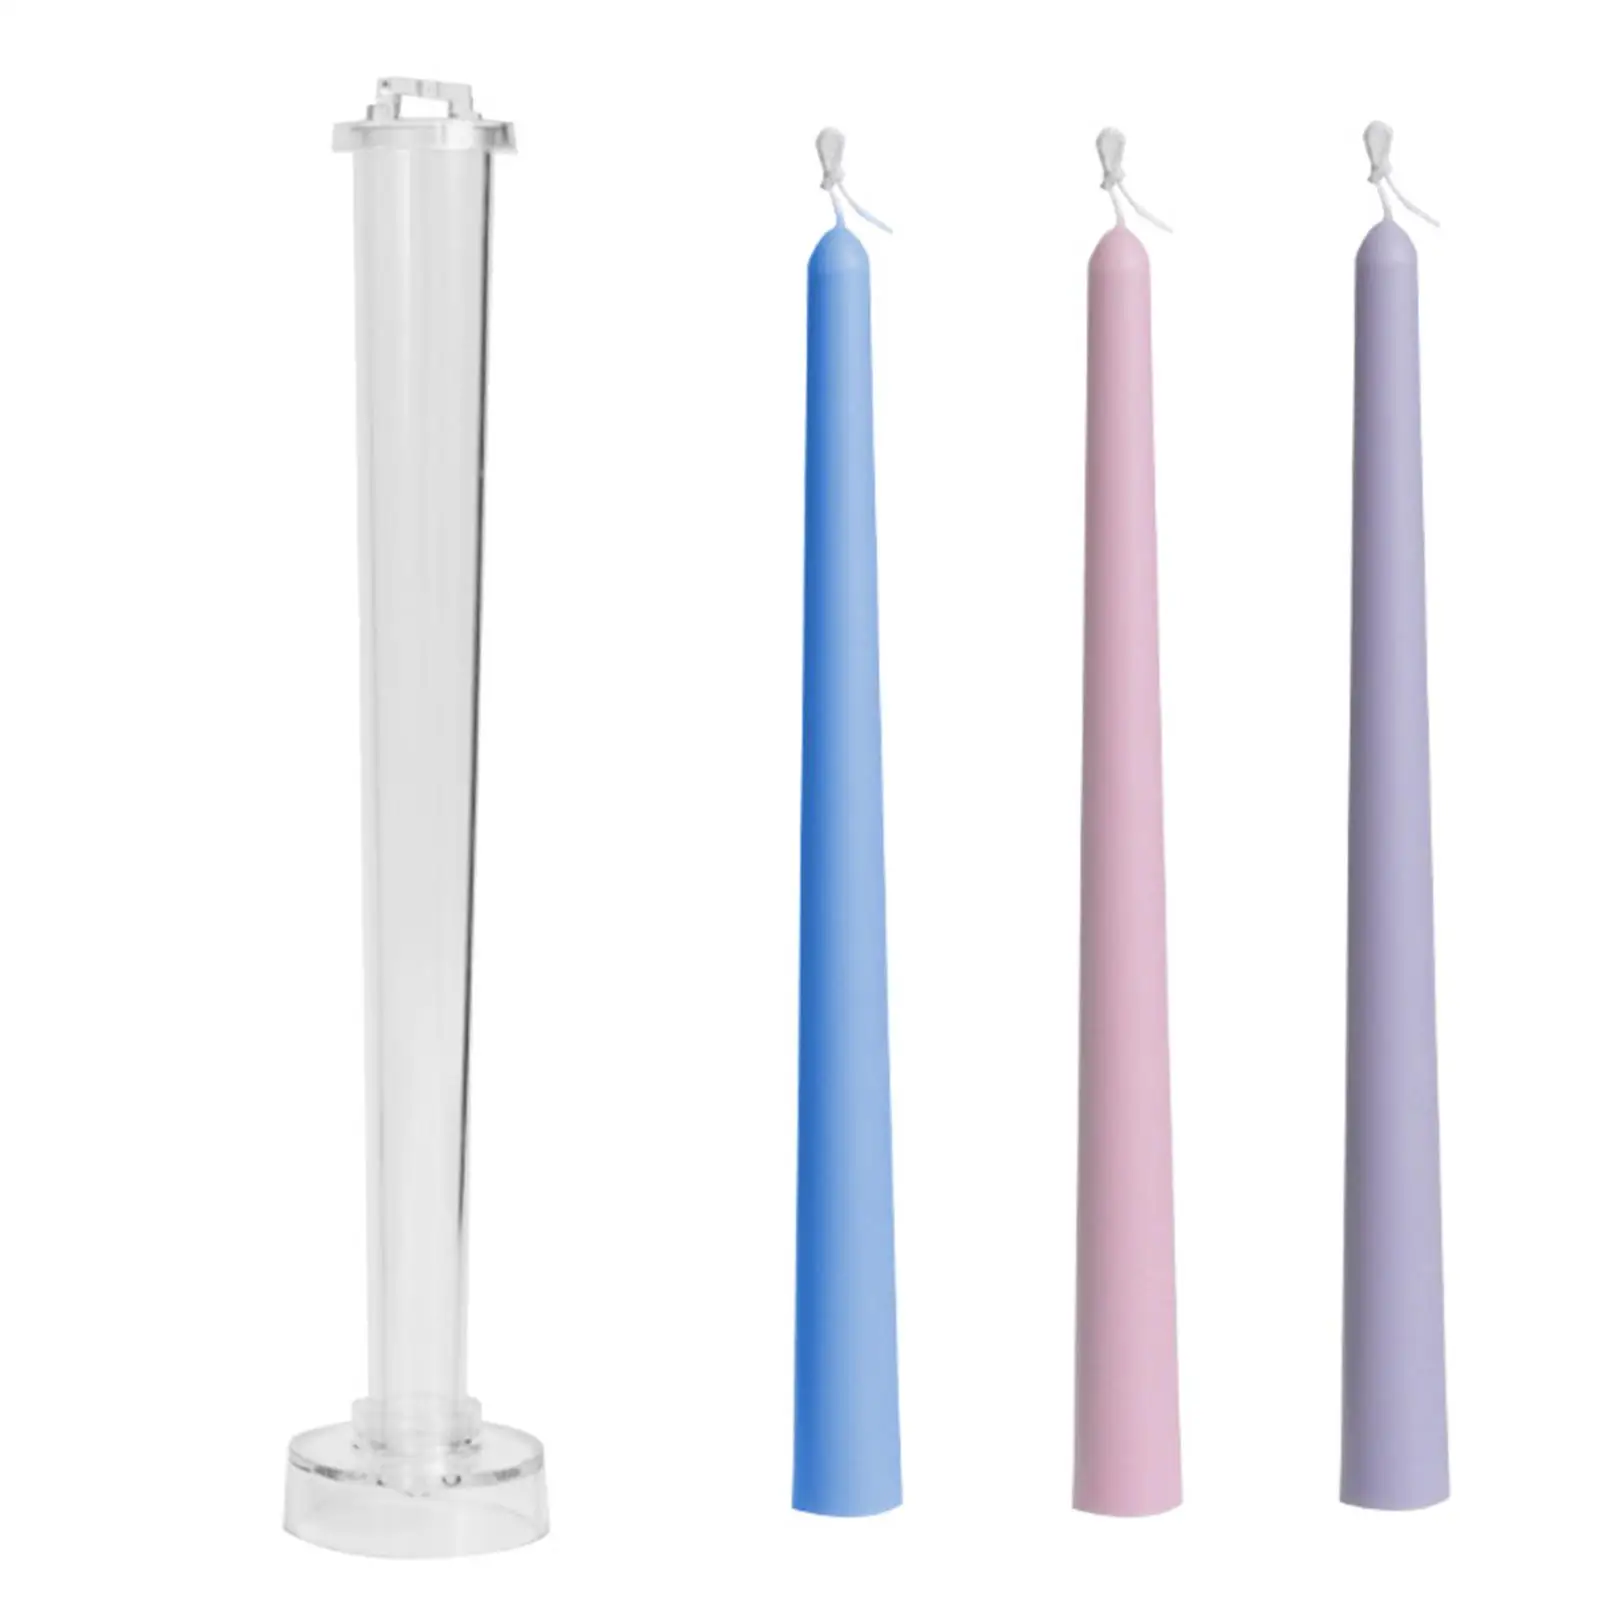 Plastic Candle Mold Candle Making Molds Durable Rod Candles Mould for Pillar Candle Making Table Candles Parties Church Home